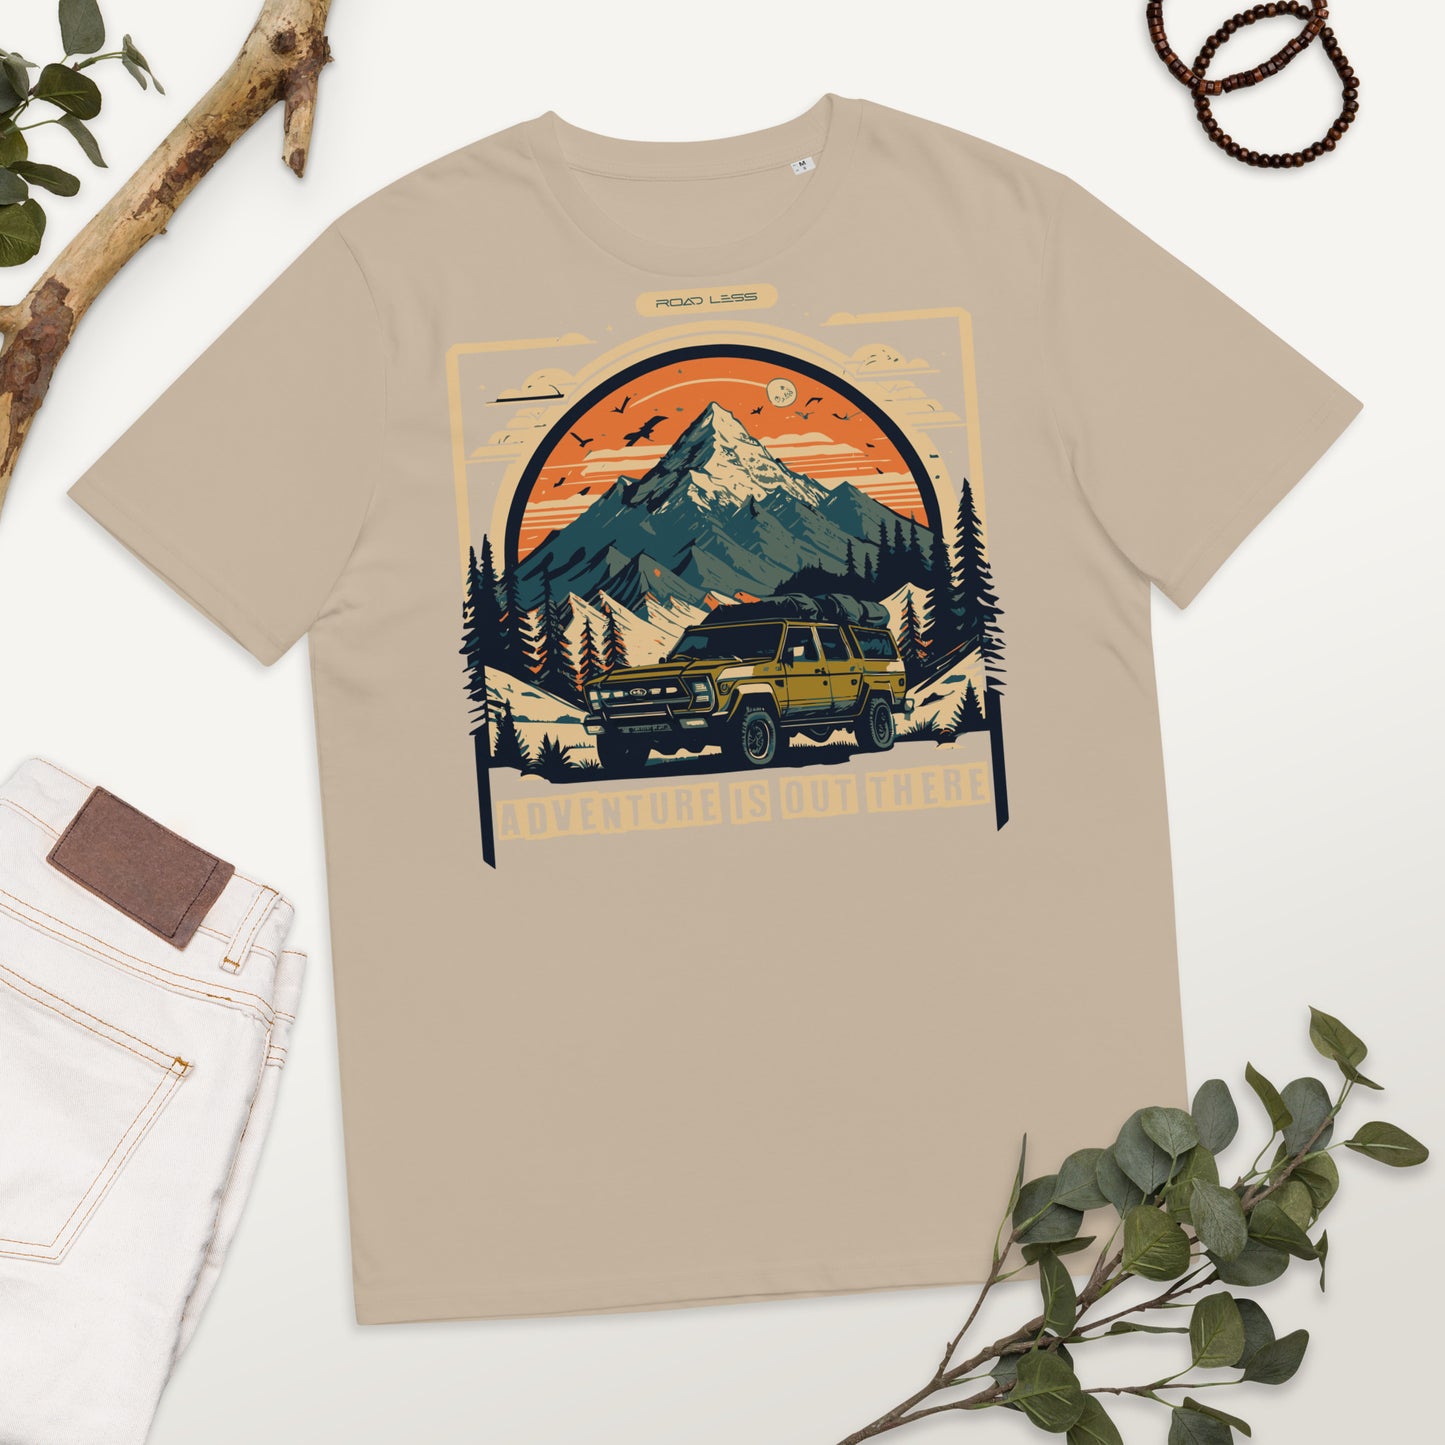 Unisex-Bio-Baumwoll-T-Shirt (Adventure is out there)